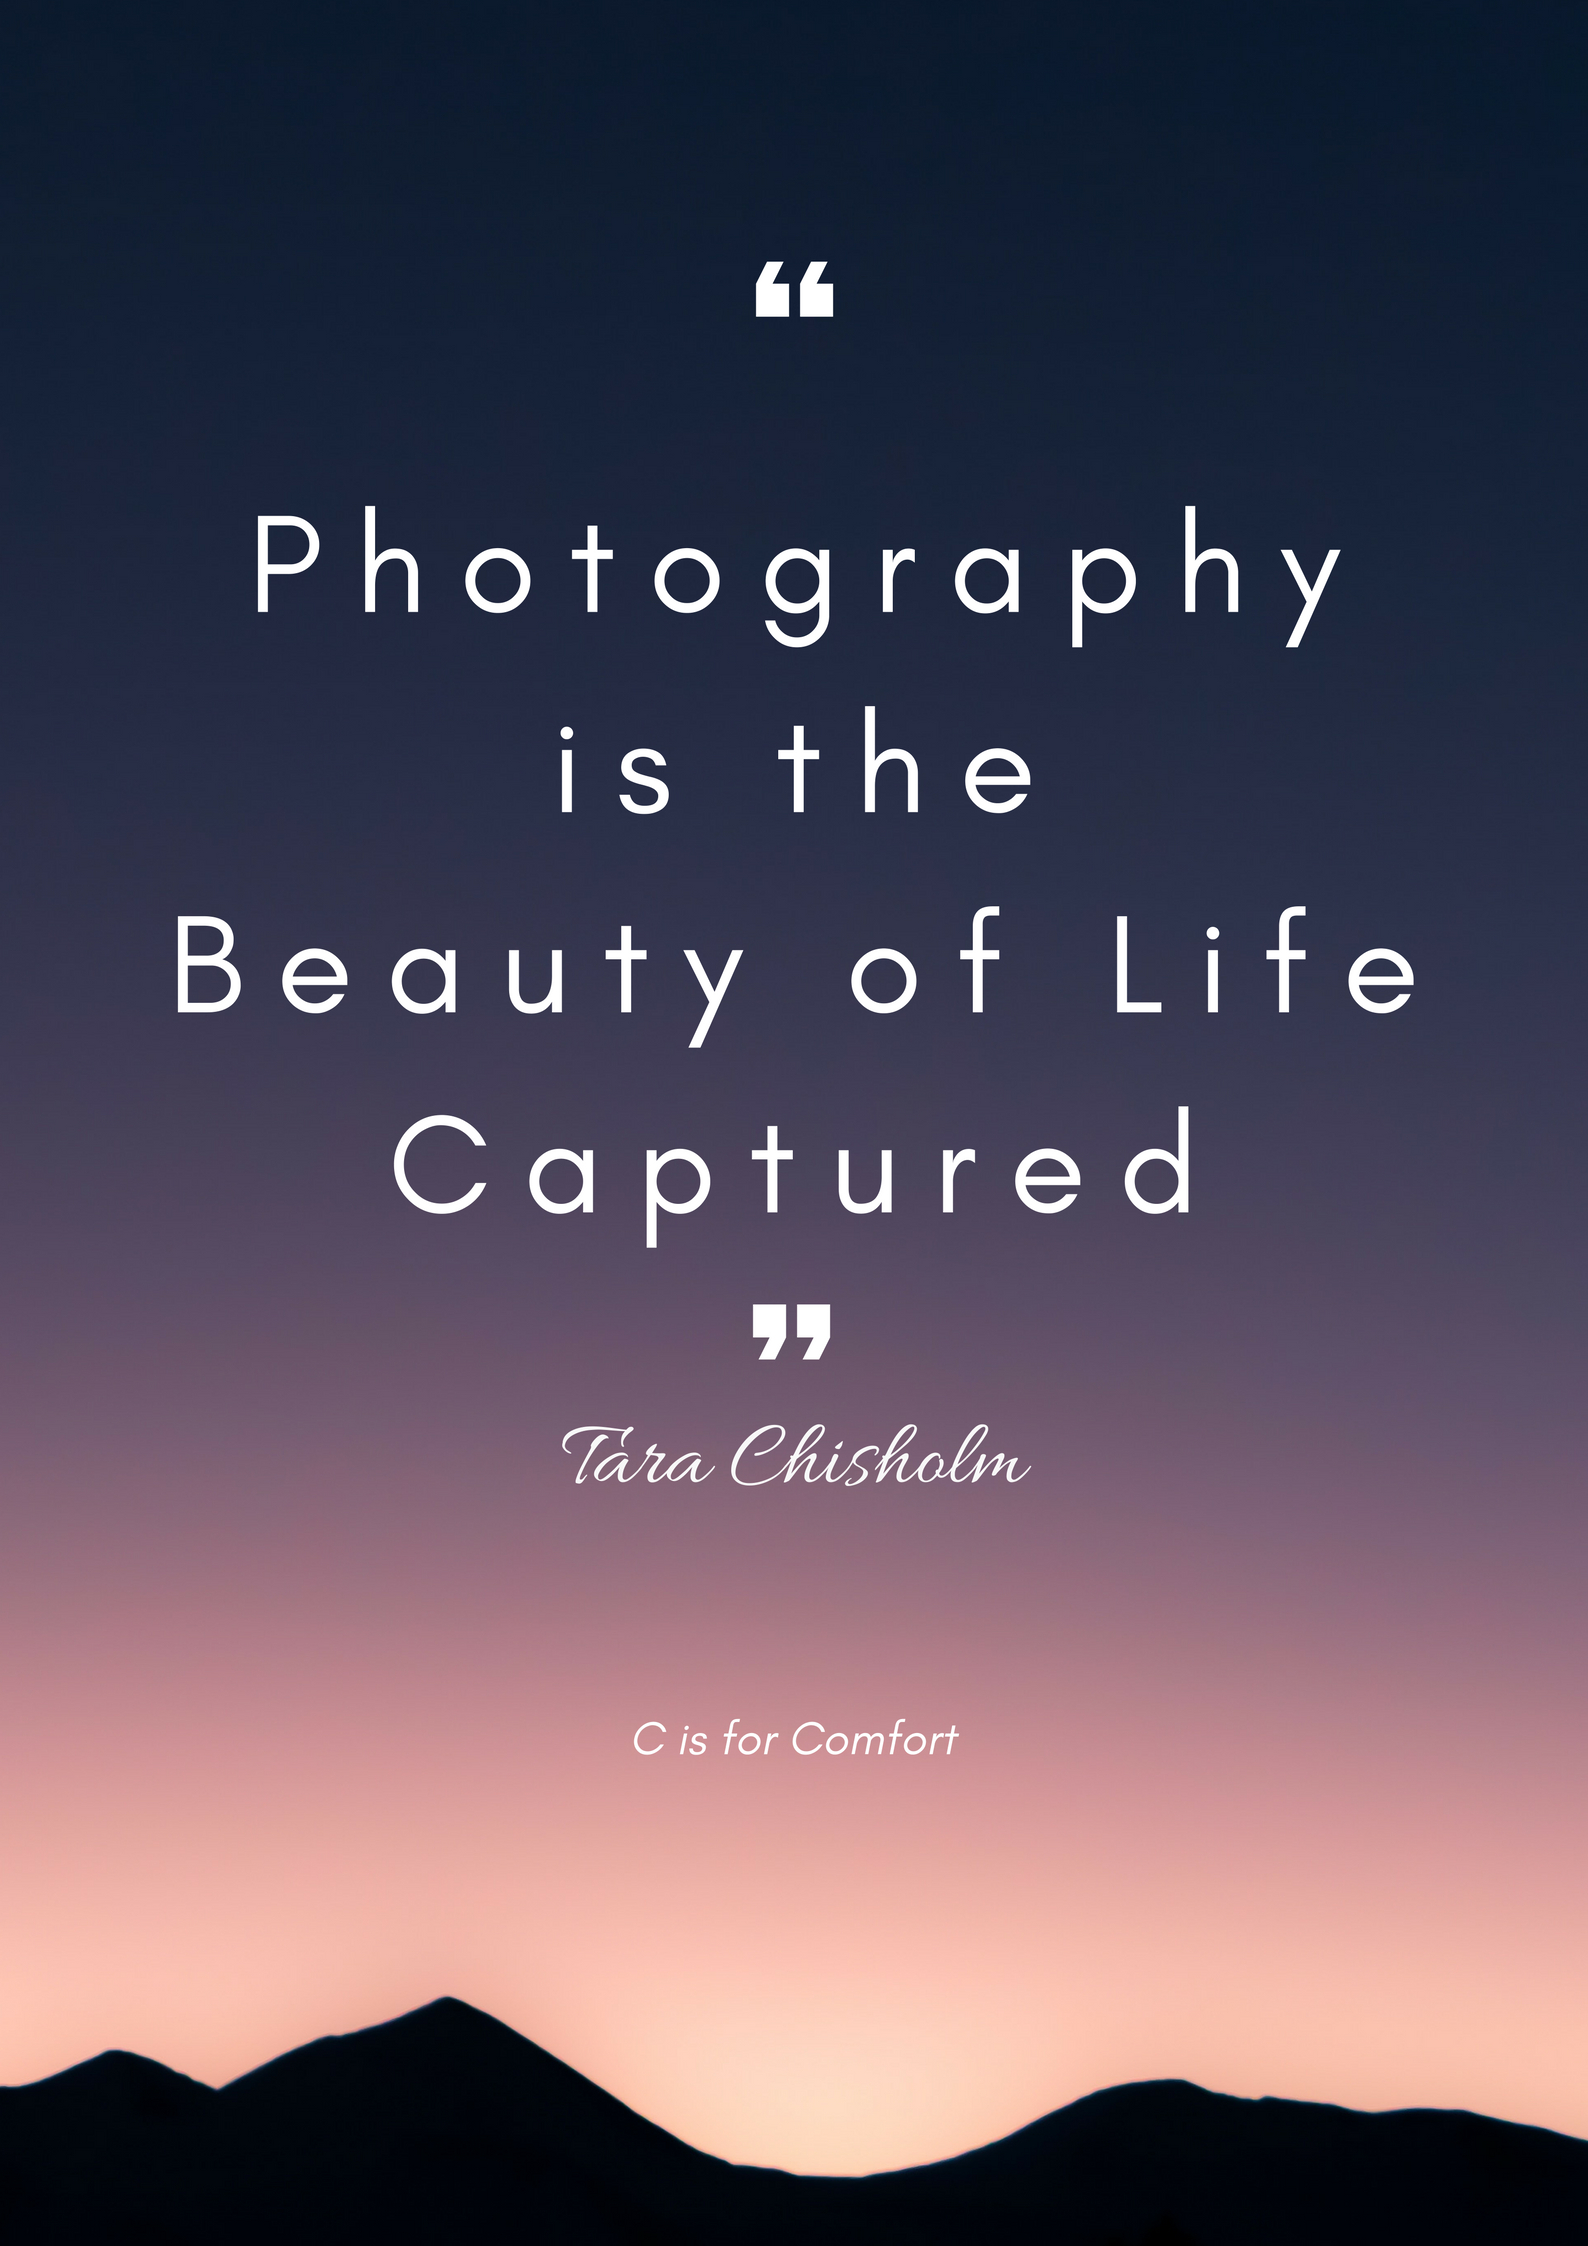 45 Inspirational Quotes for Photographers – C is for Comfort